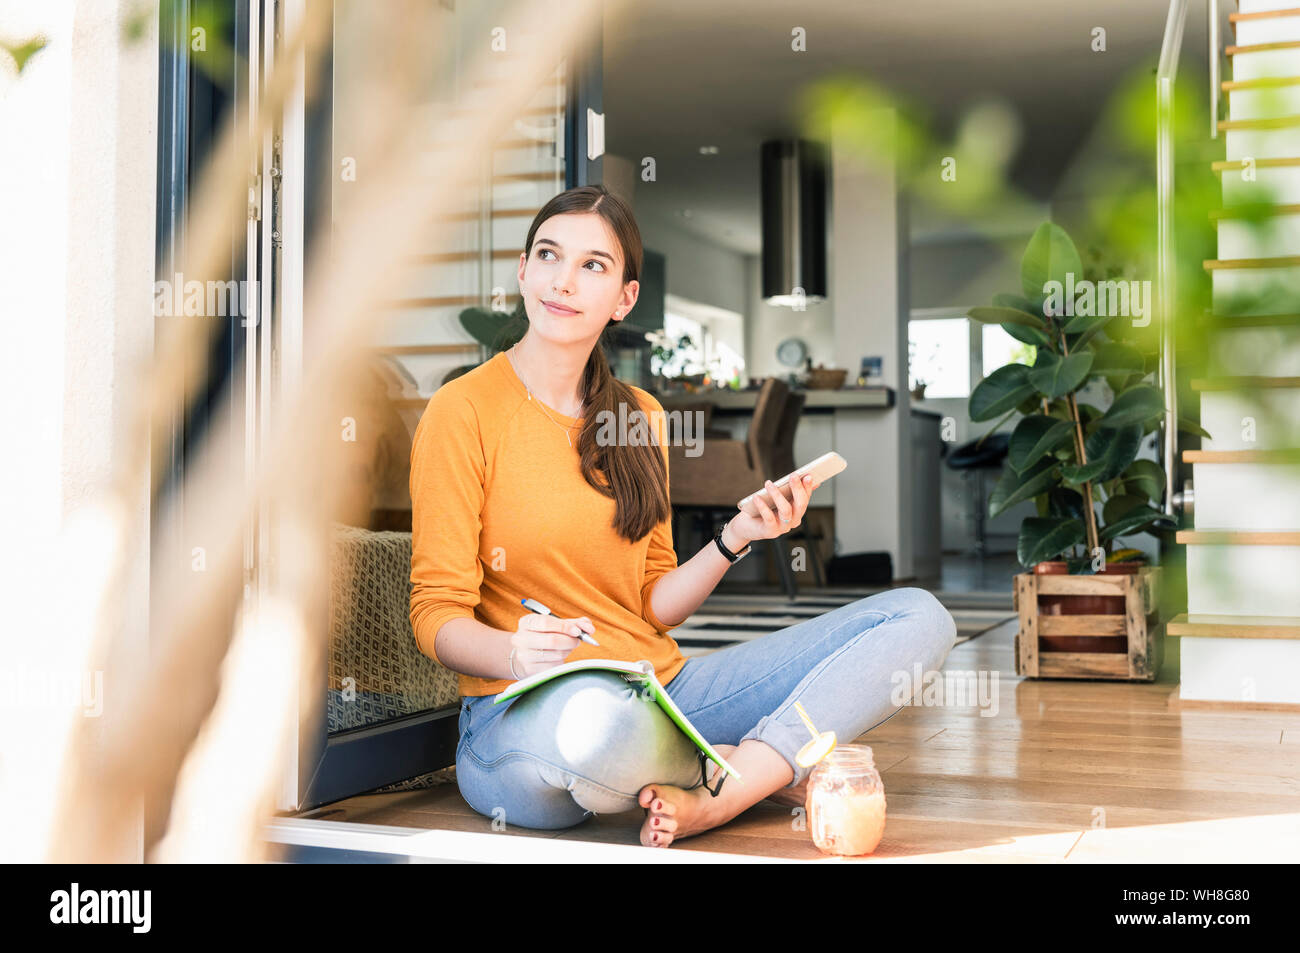 Young woman sitting with cell phone and notebook at terrace door Stock Photo